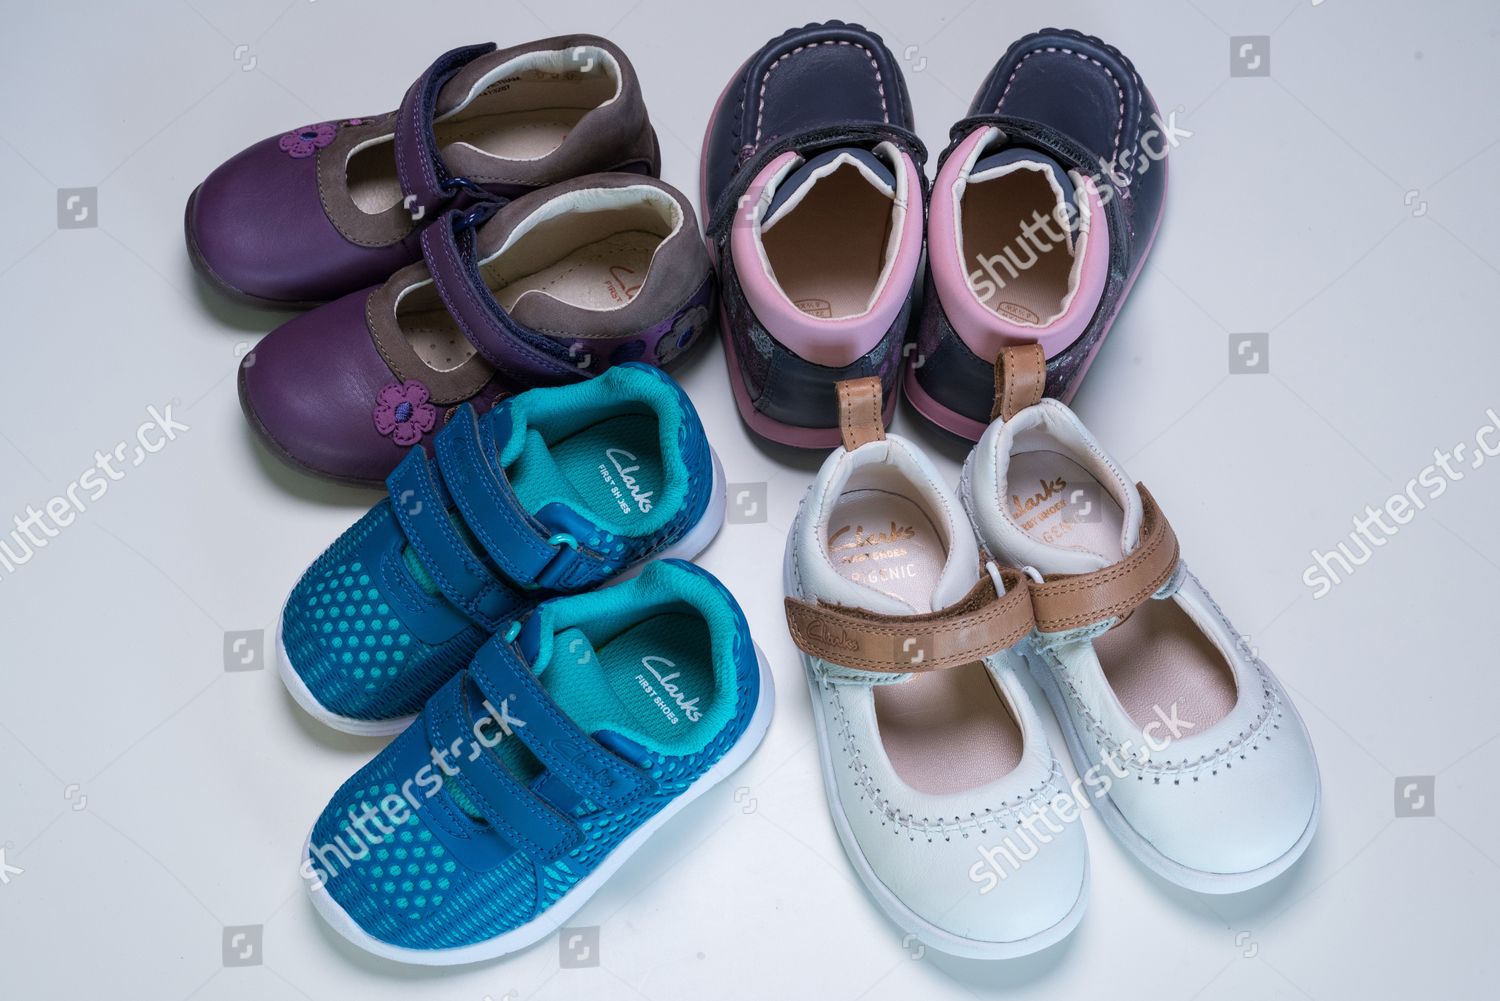 clarks children's first shoes